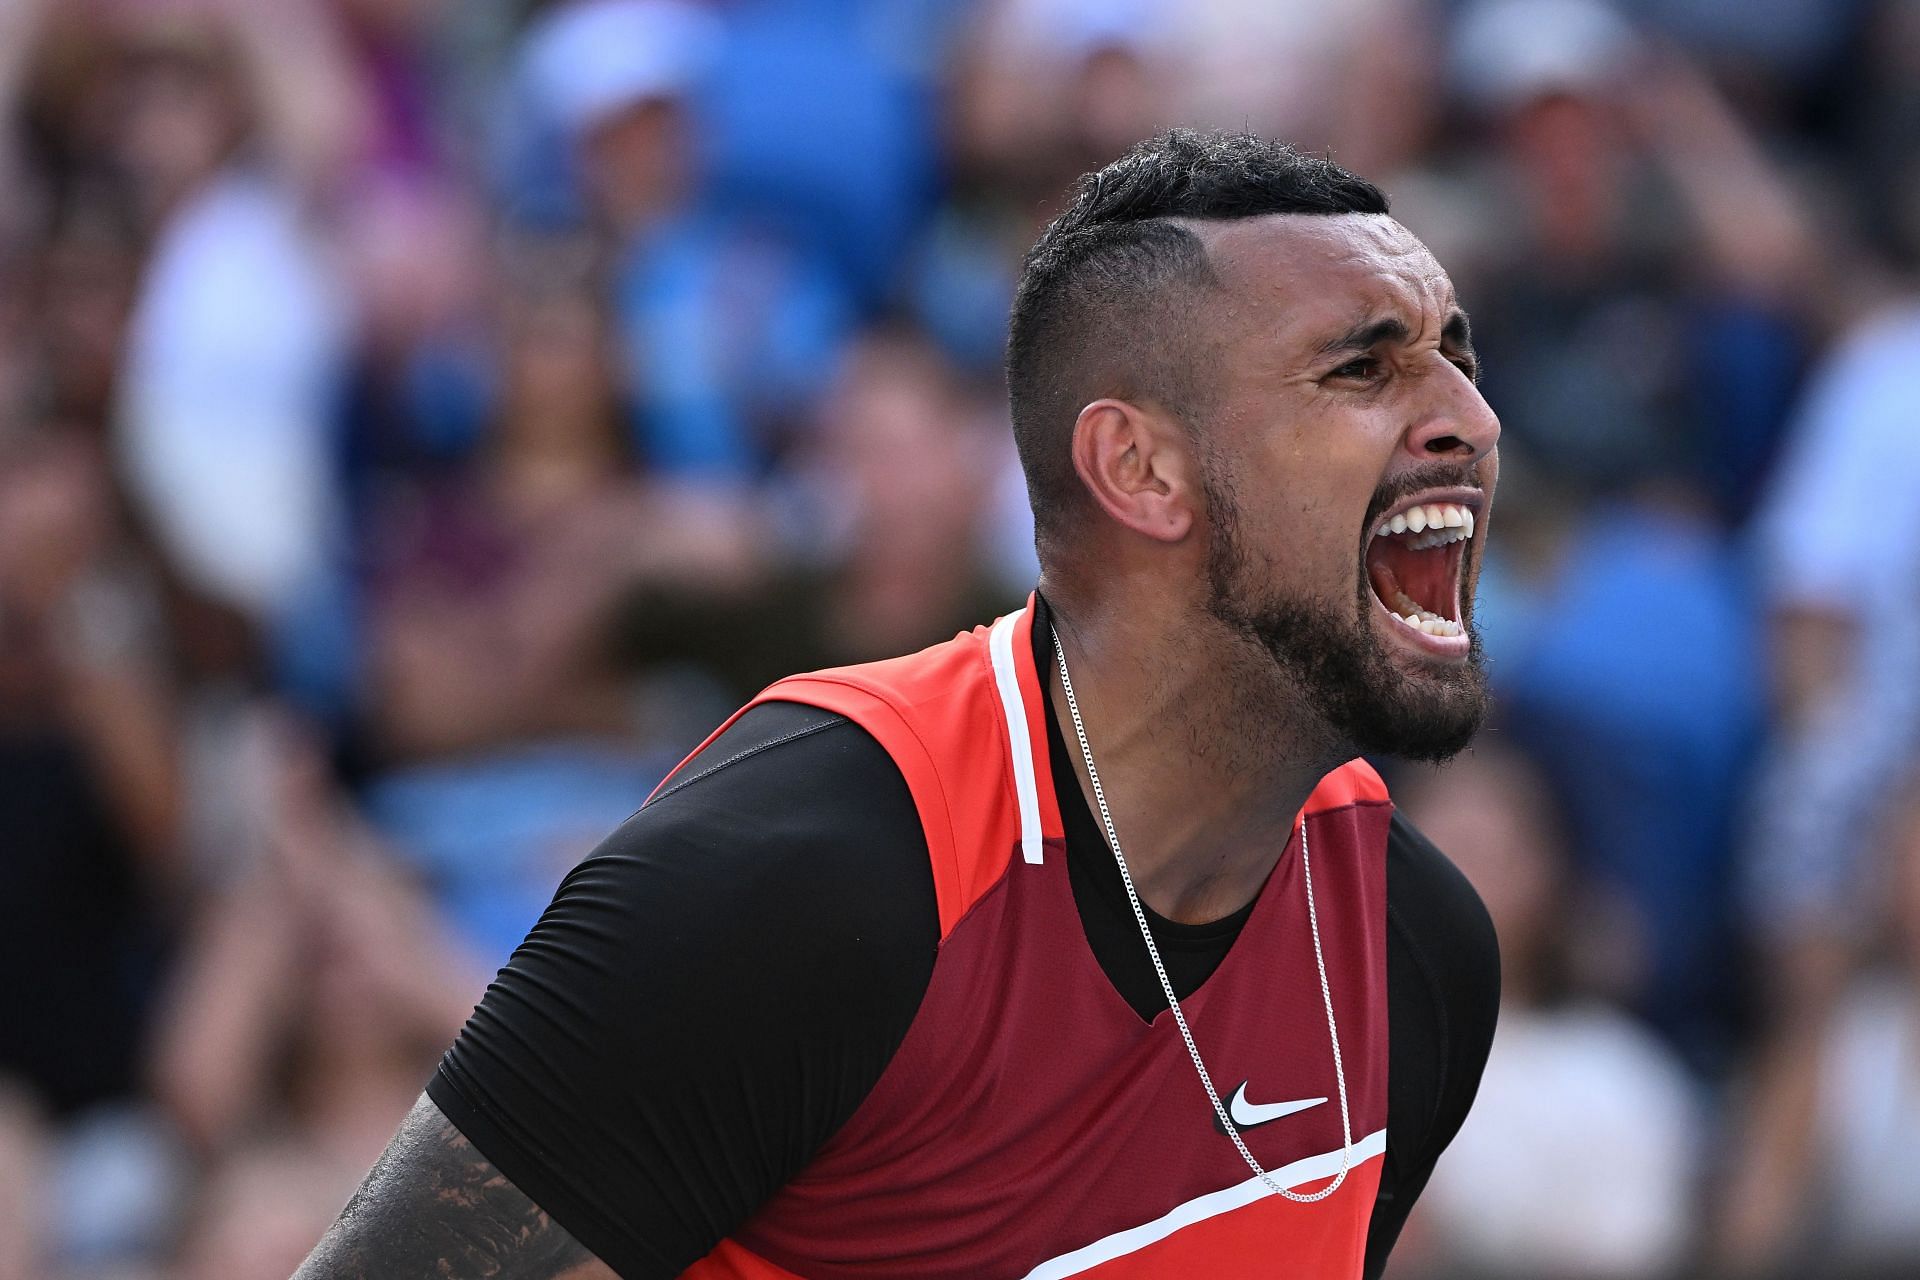 &quot;They want a crowd, I&rsquo;m bringing a riot&quot; - Nick Kyrgios is fired up ahead of 2022 US Open